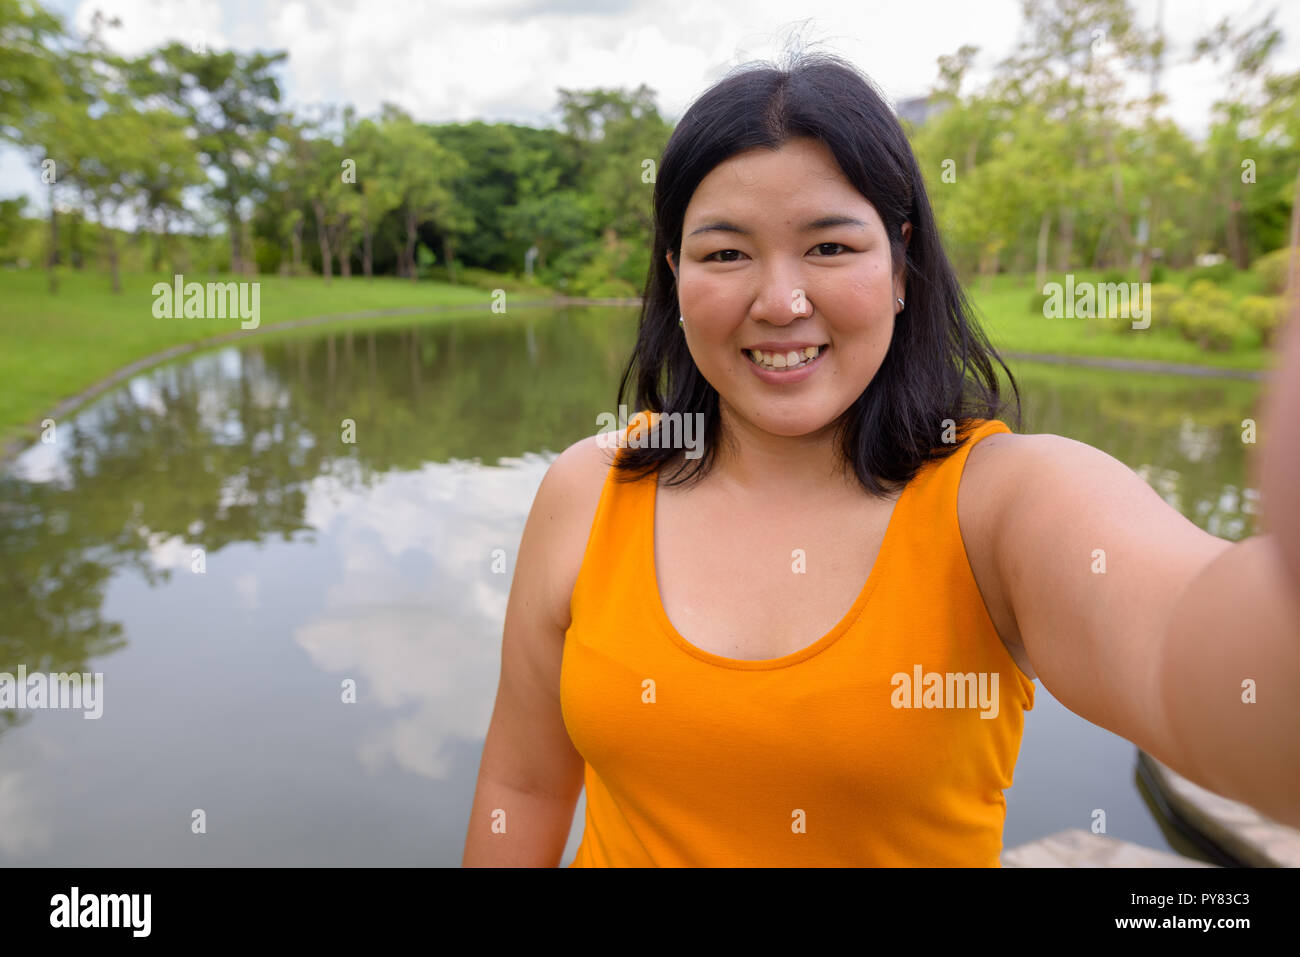 Personal point of view of beautiful overweight woman taking selfie in park Stock Photo